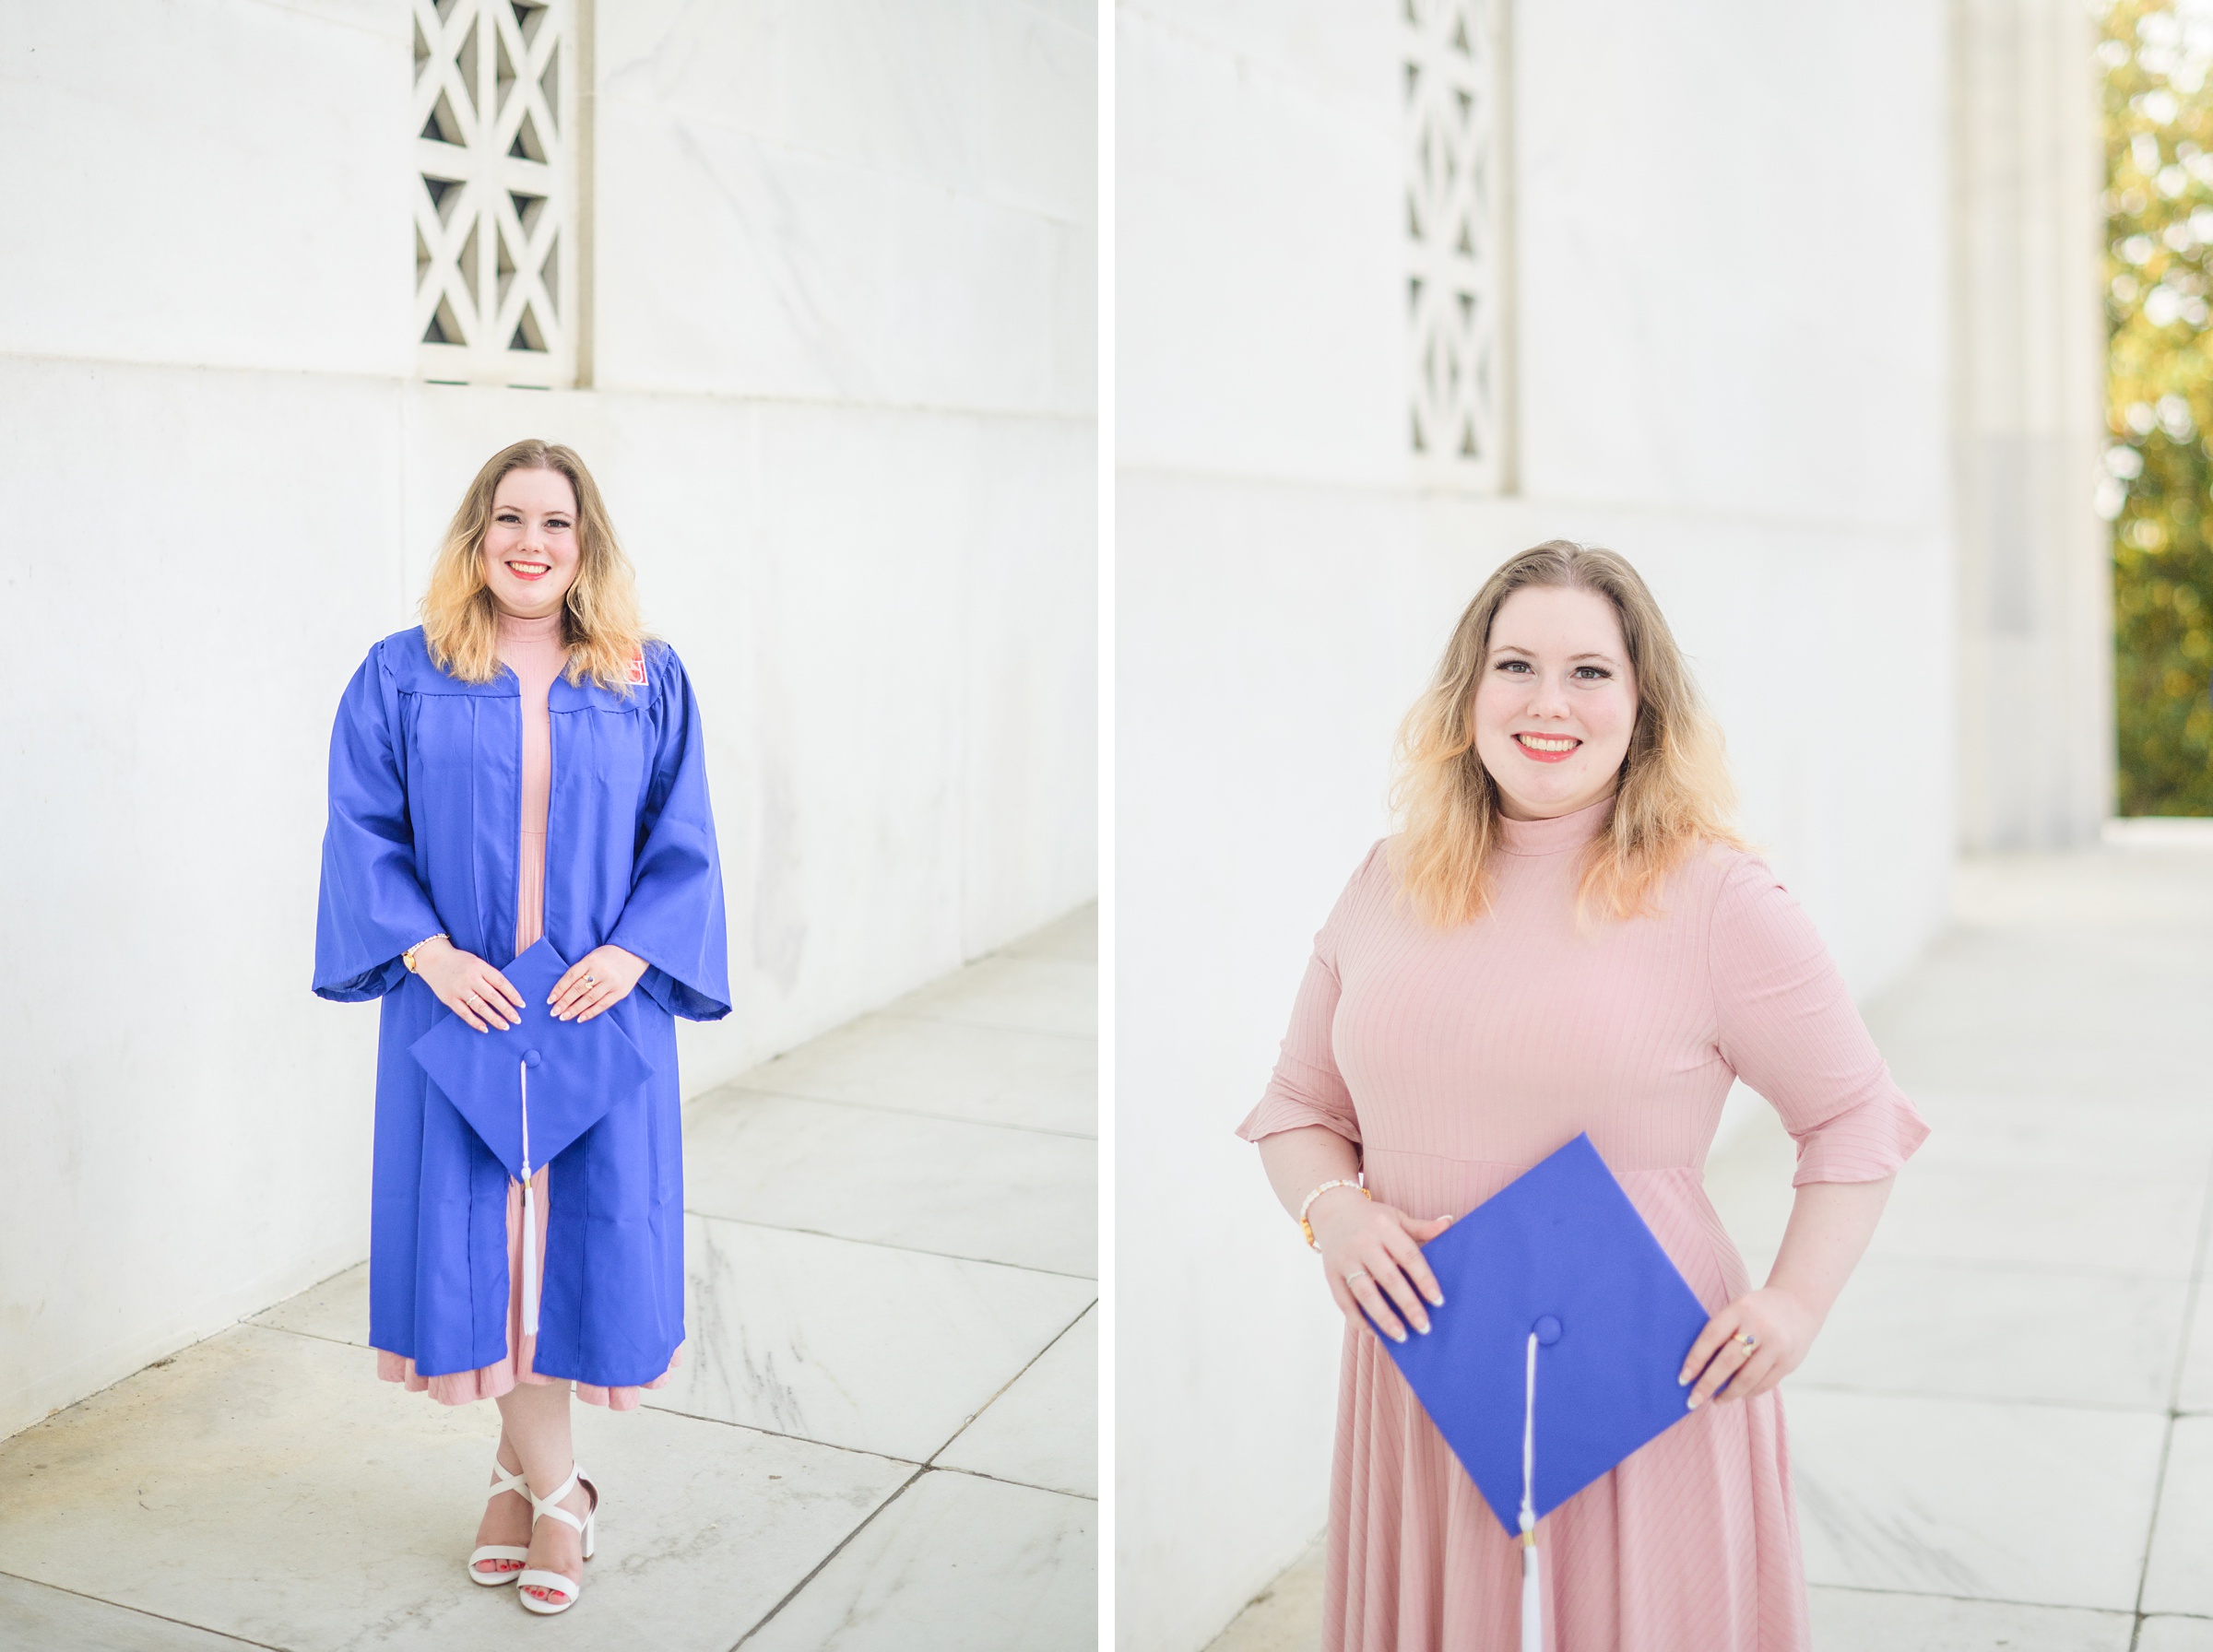 American University Senior Photos on the National Mall photographed by Baltimore Photographer Cait Kramer